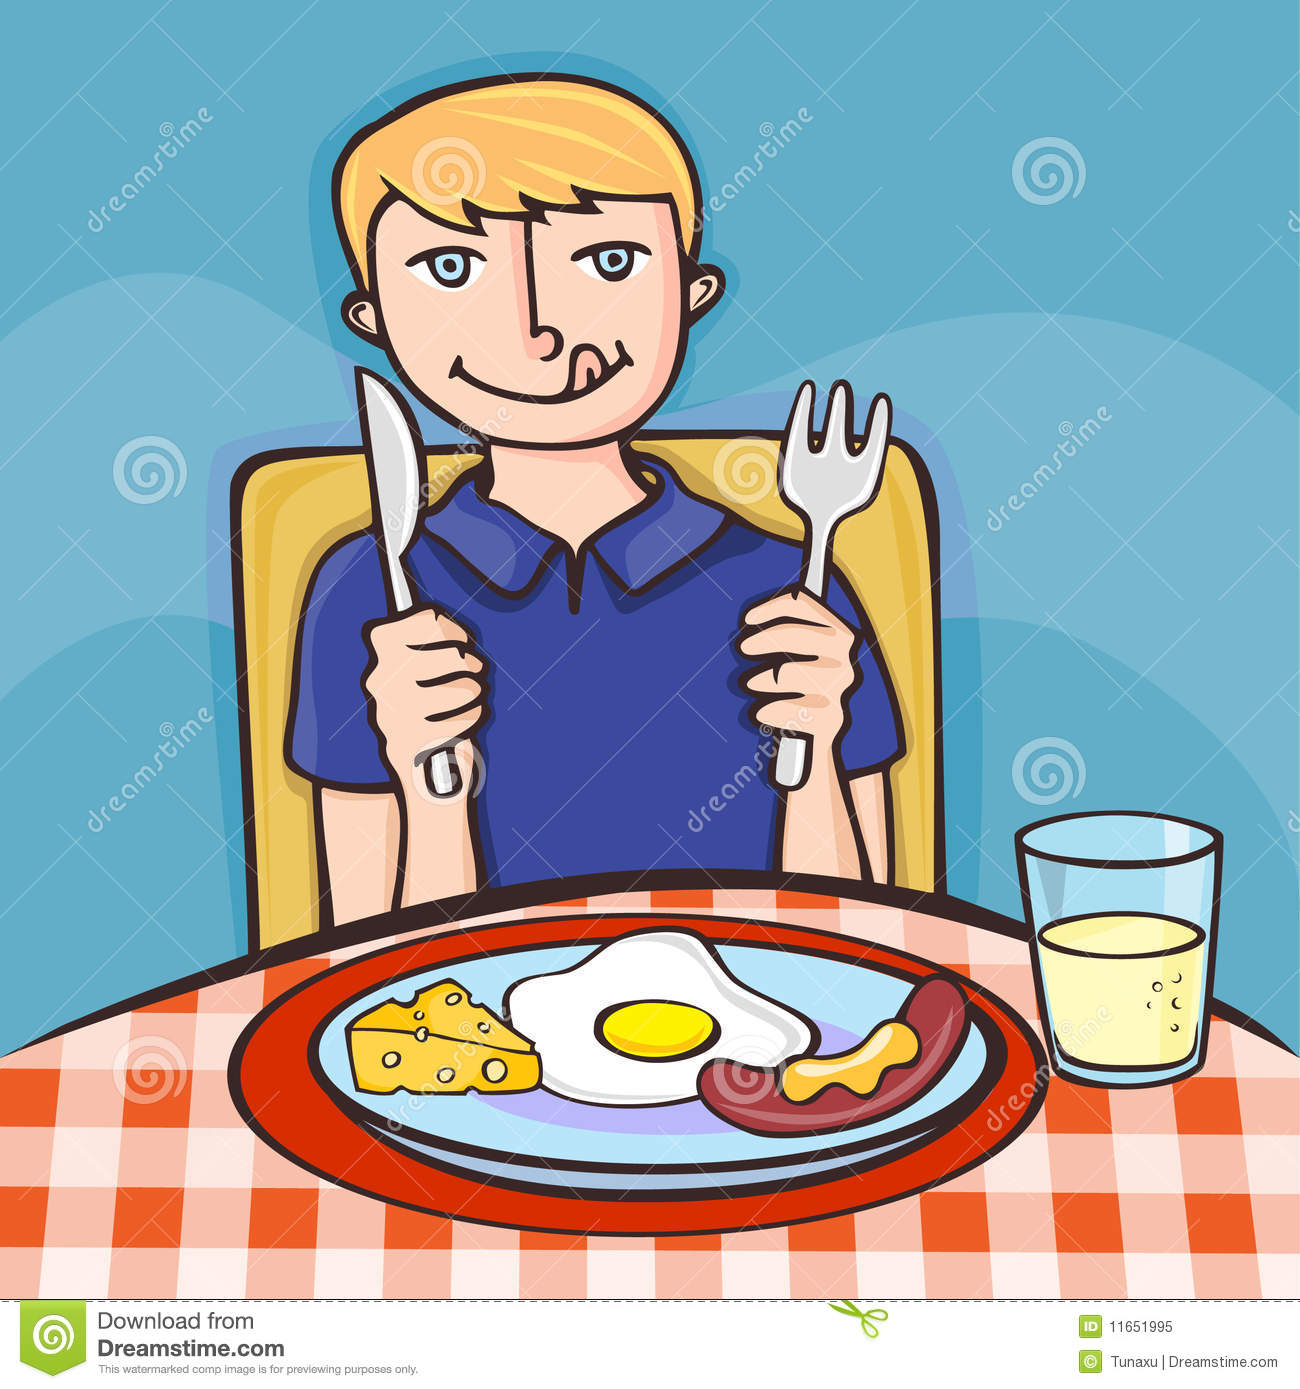 Breakfast Time Royalty Free Stock Photo   Image  11651995